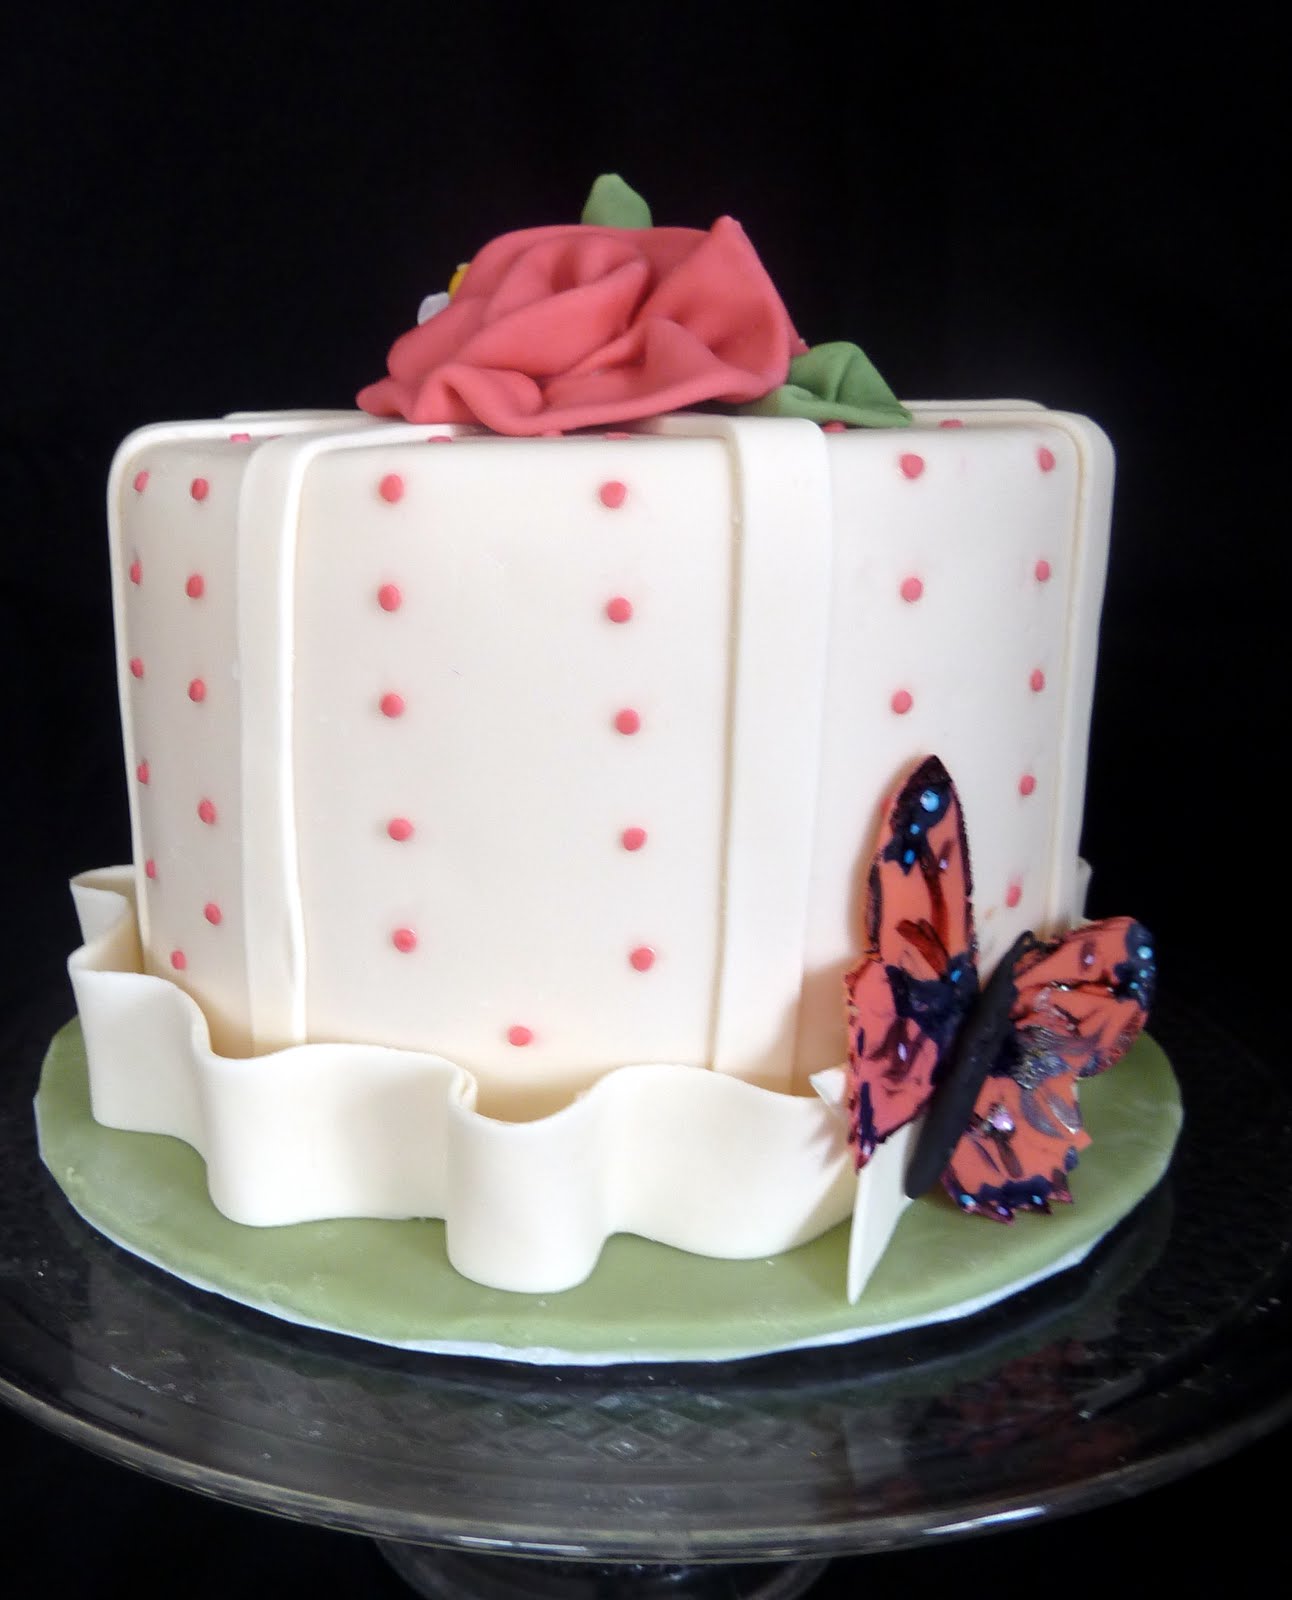 Inspiration 80 of Cake Decorating Classes For Kids